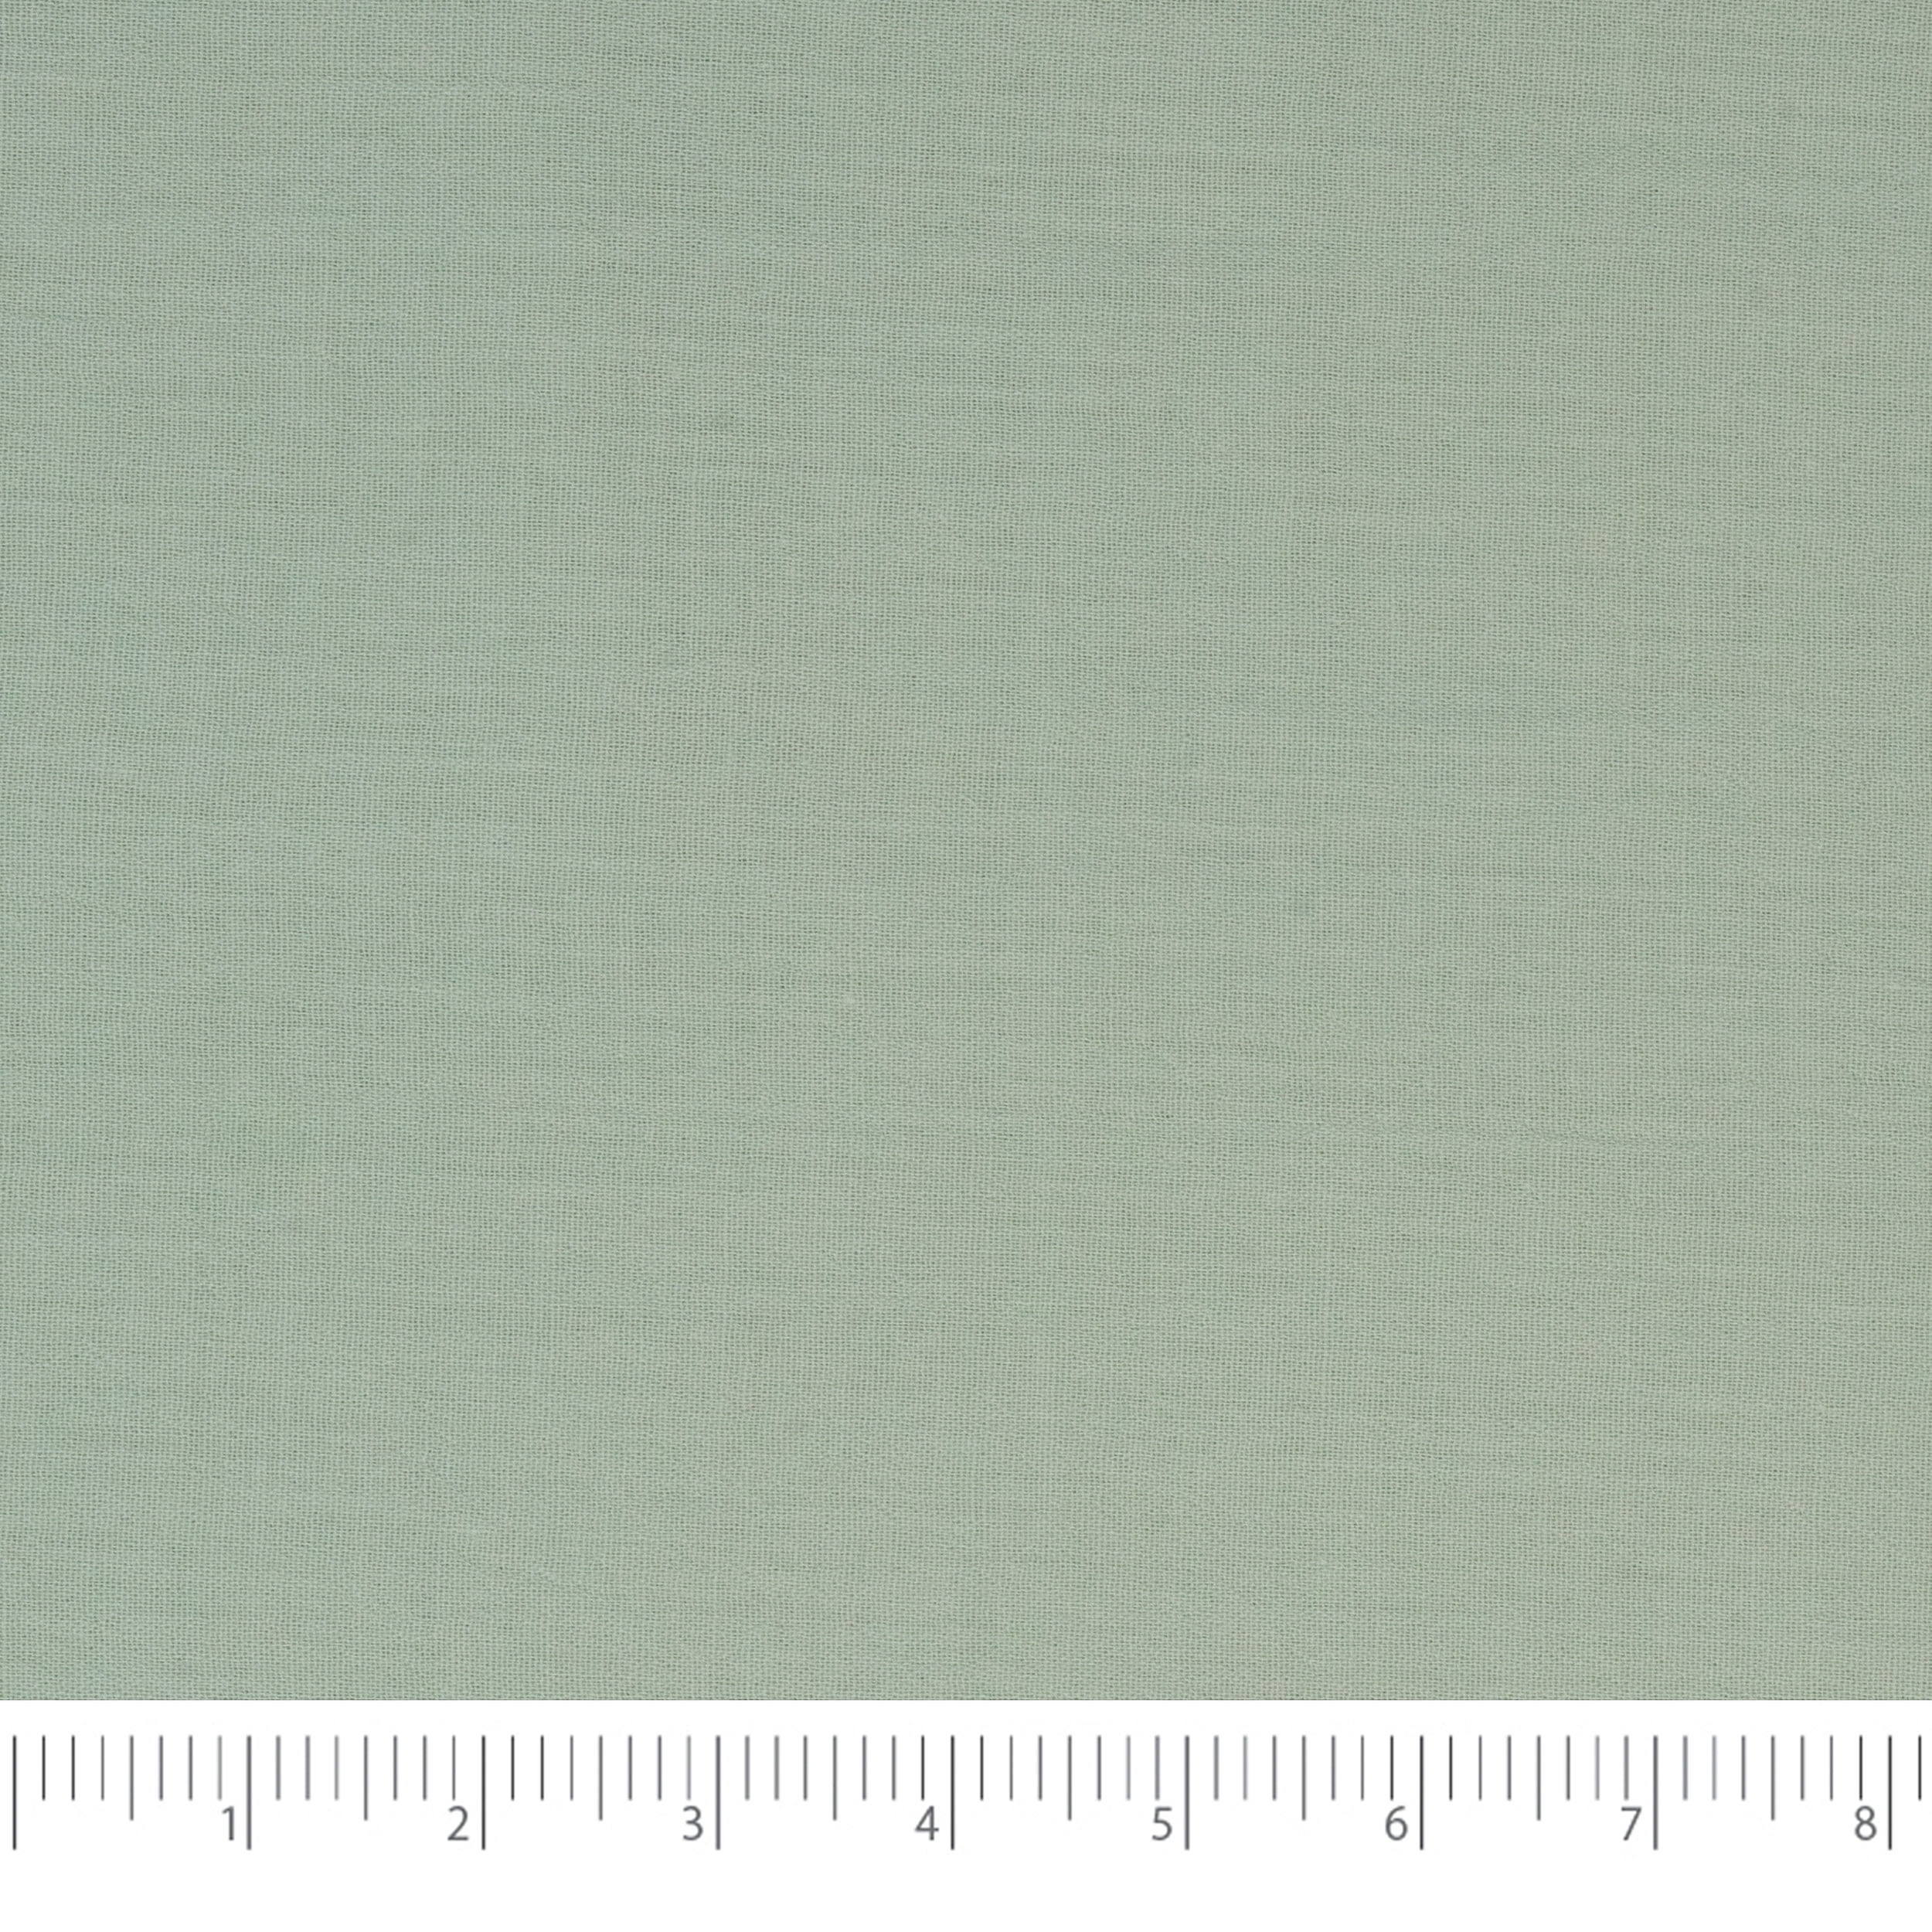 Amy Butler 100% Cotton Muslin Natural Fabric by The Yard